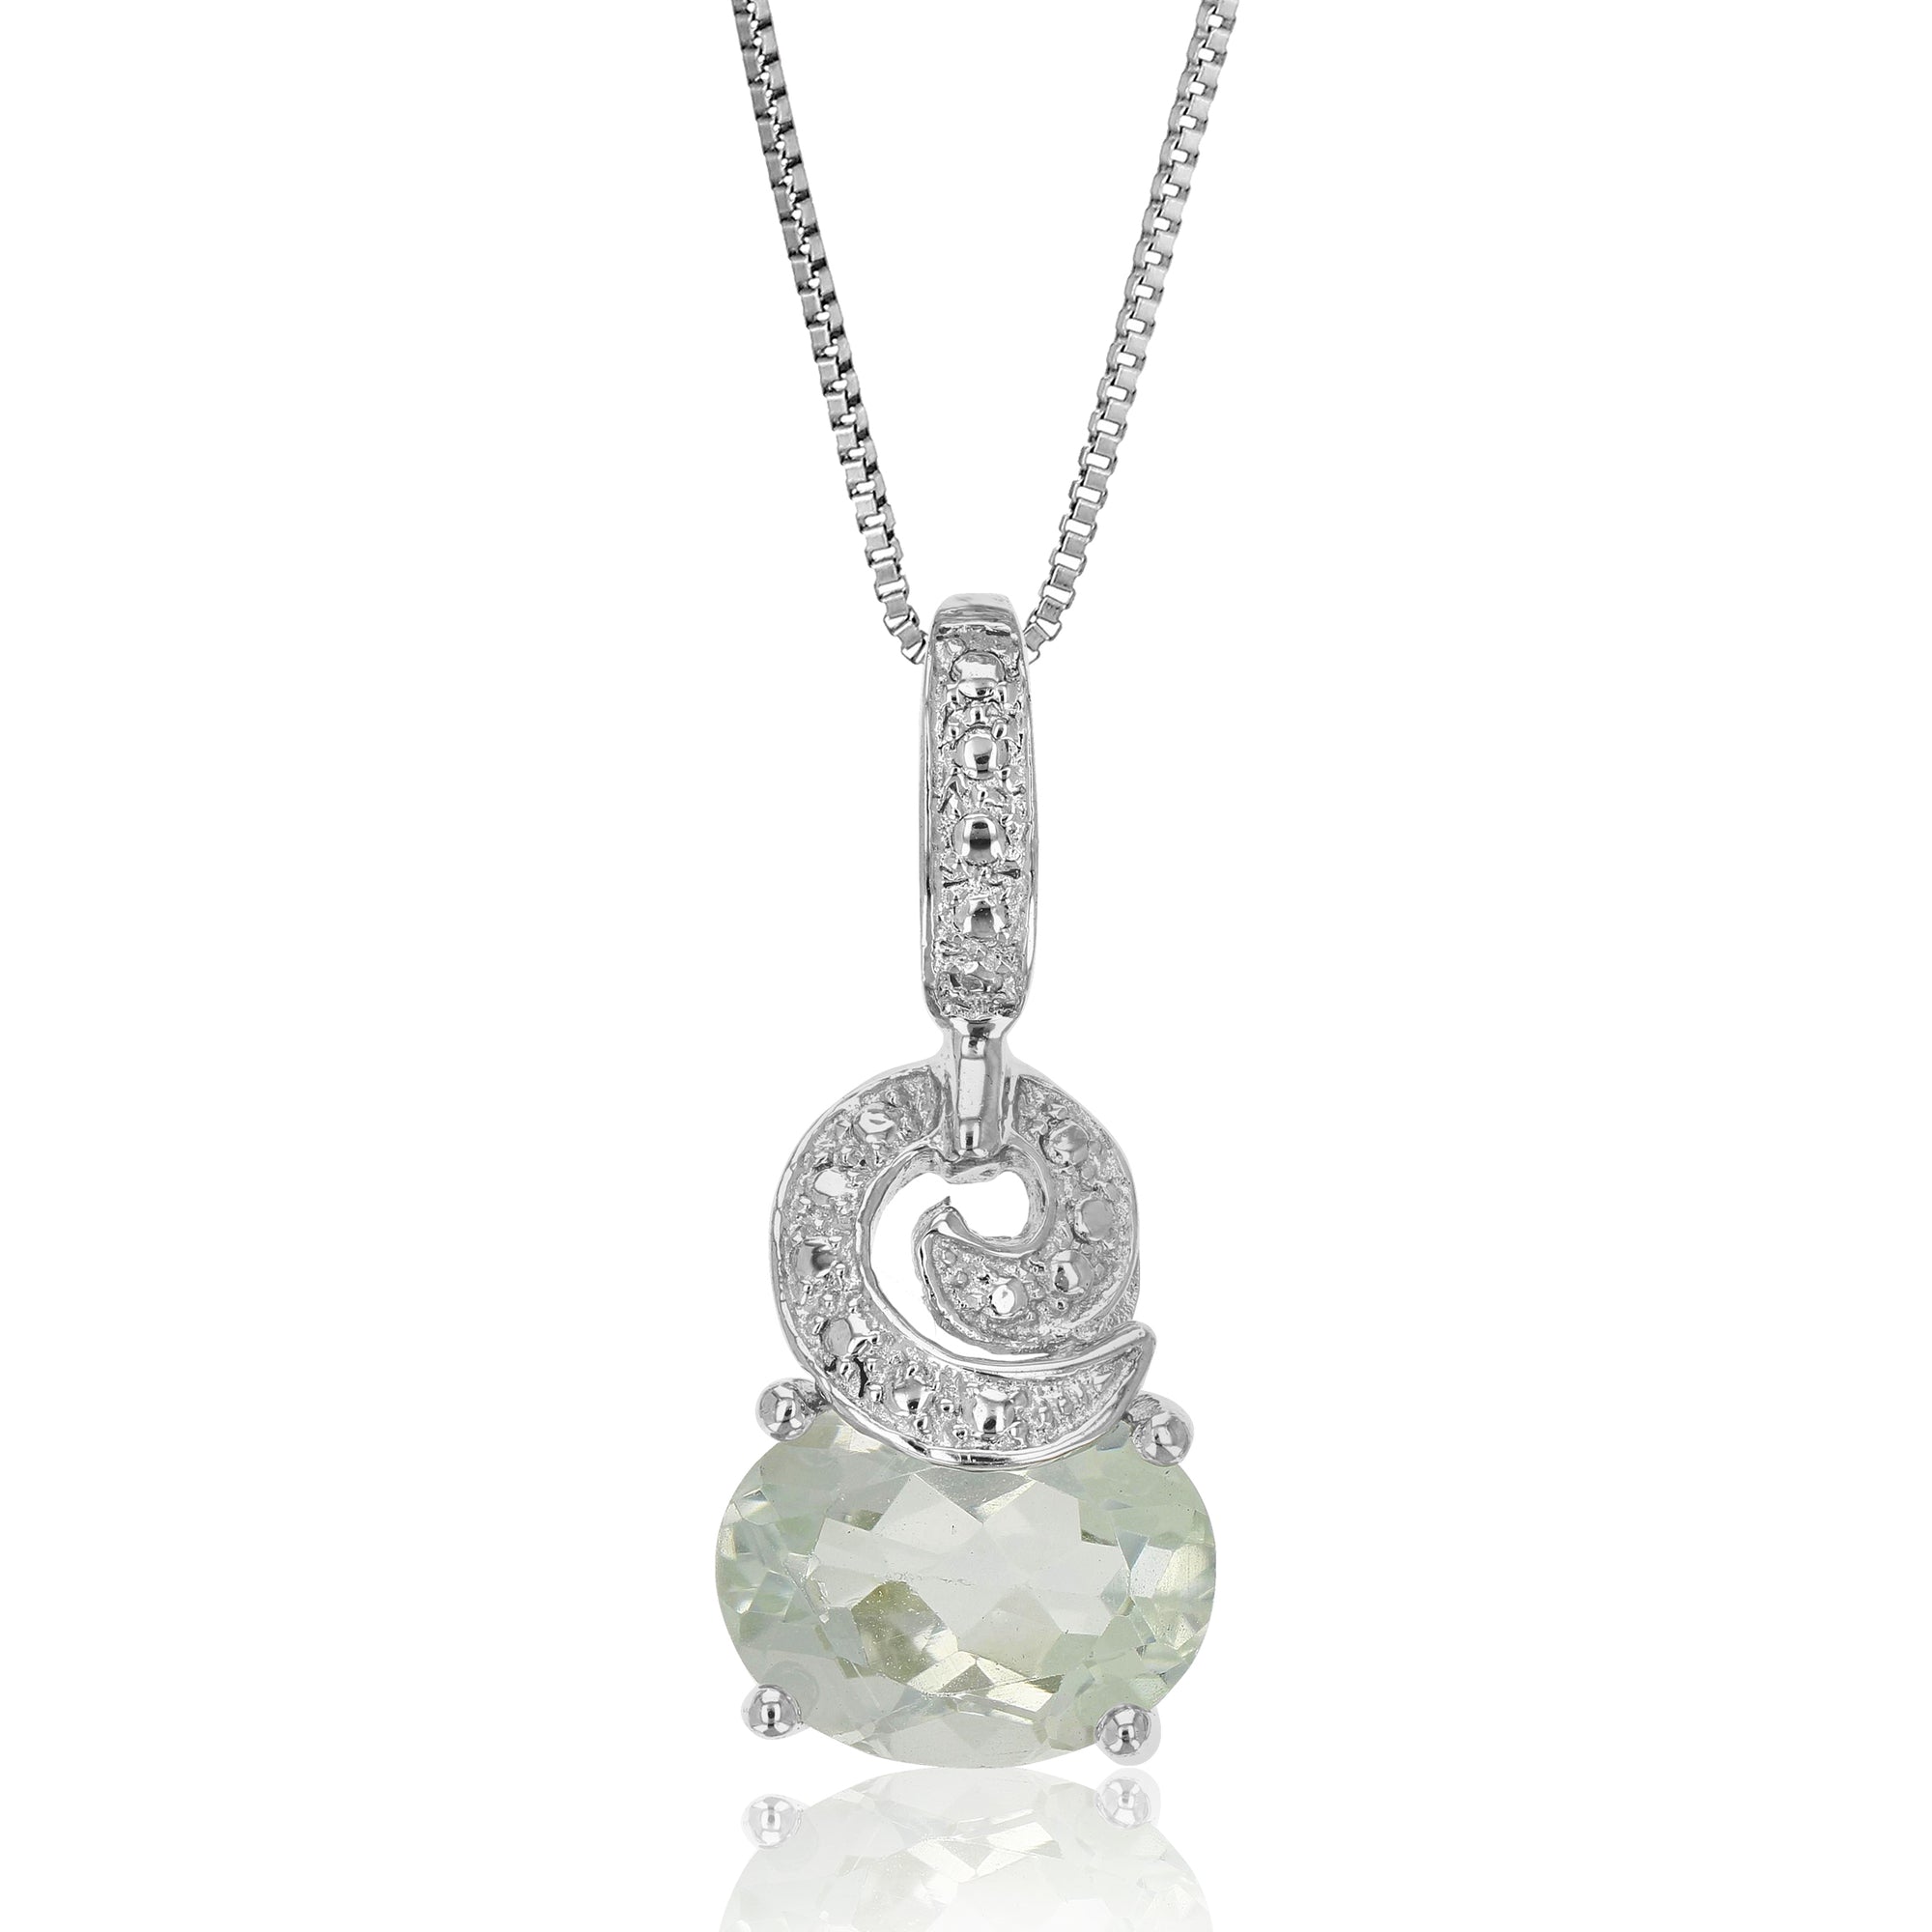 1.70 cttw Pendant Necklace, Green Amethyst Oval Pendant Necklace for Women in .925 Sterling Silver with Rhodium, 18 Inch Chain, Prong Setting